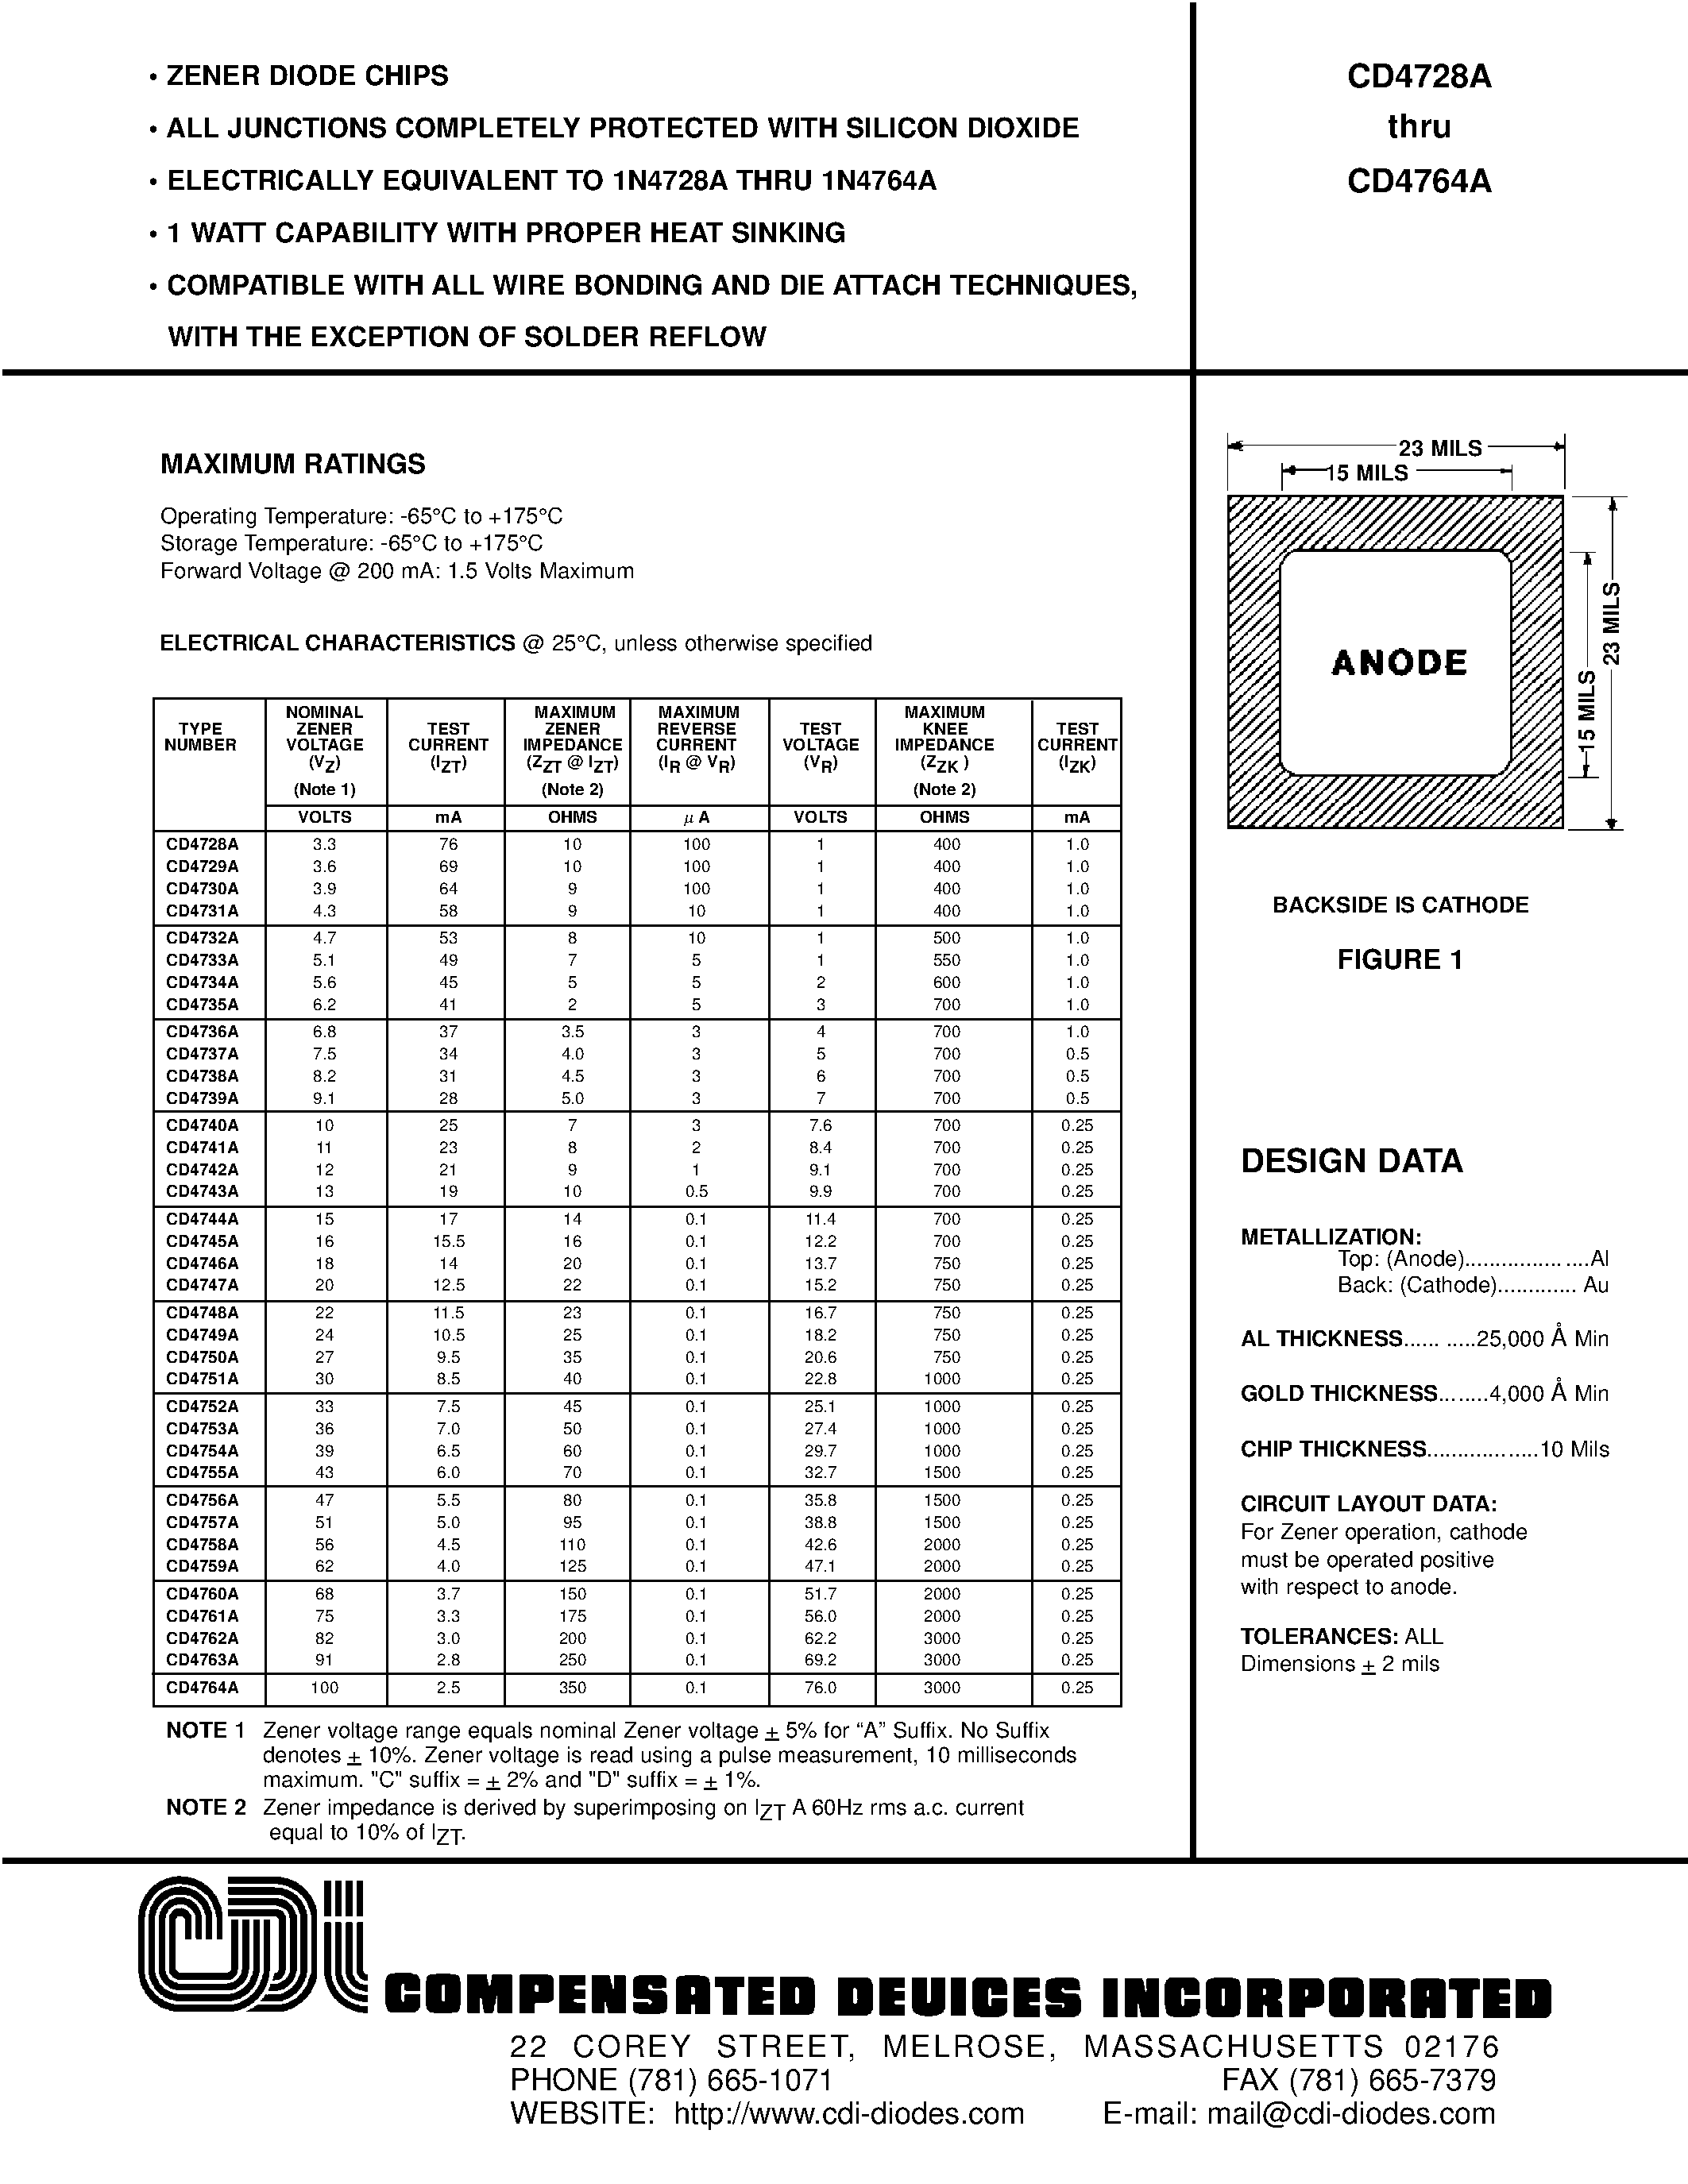 Datasheet CD4751A - ZENER DIODE CHIPS page 1